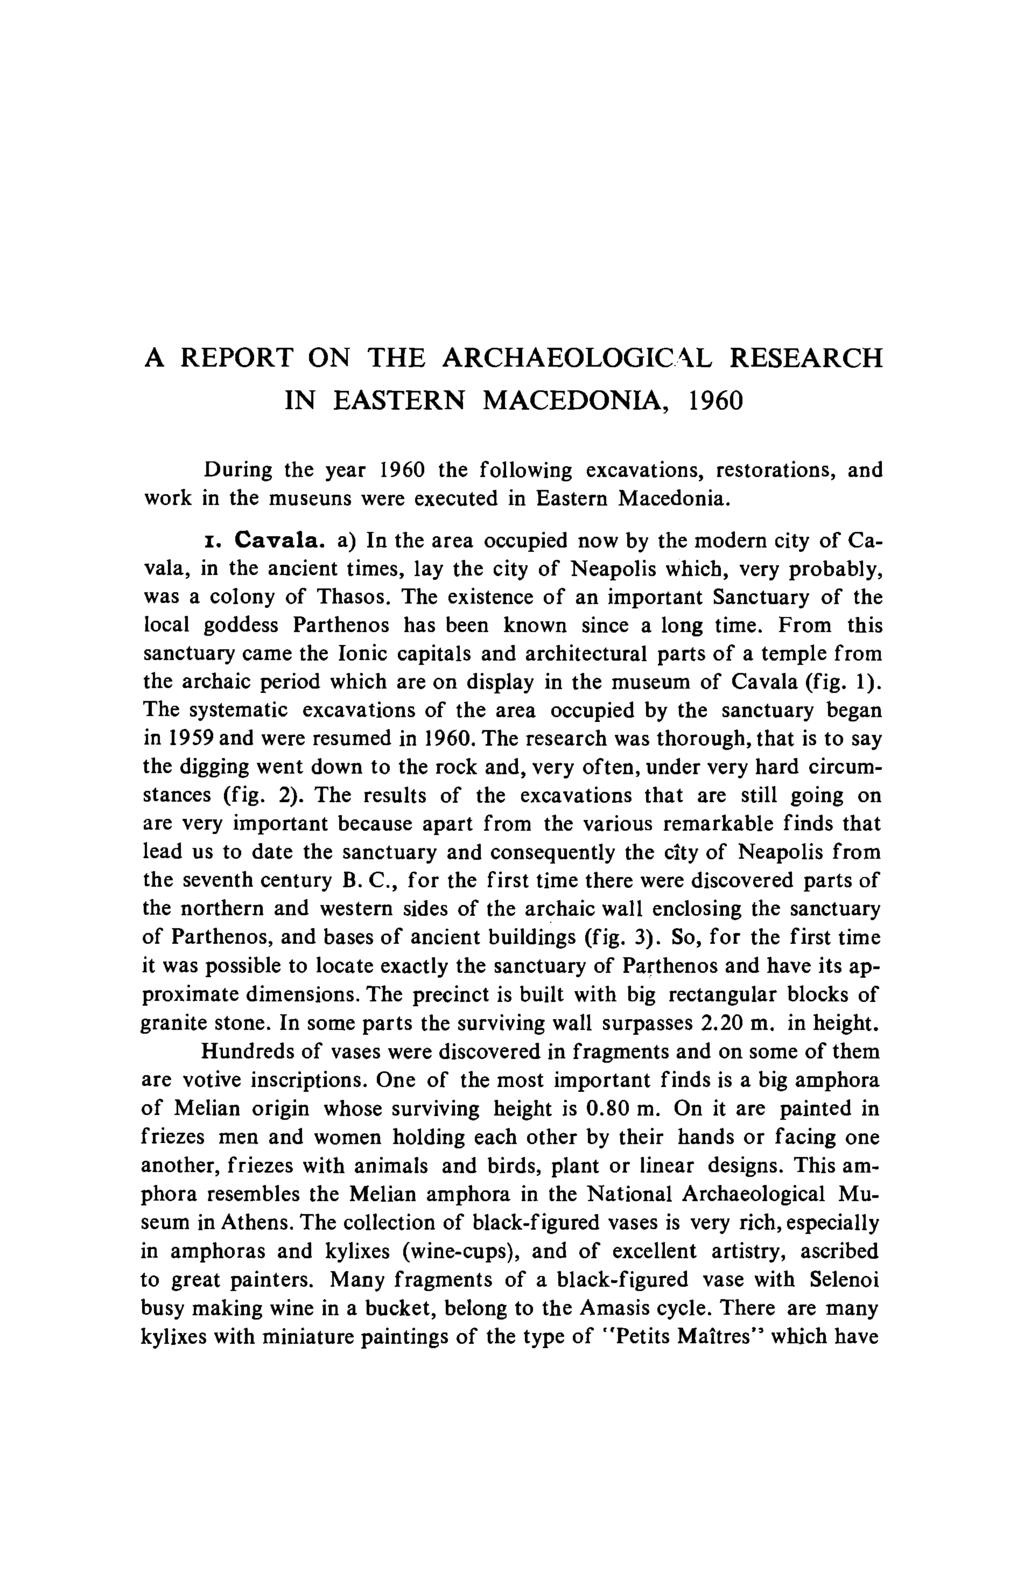 A REPORT ON THE ARCHAEOLOGICAL RESEARCH IN EASTERN MACEDONIA, 1960 During the year 1960 the following excavations, restorations, and work in